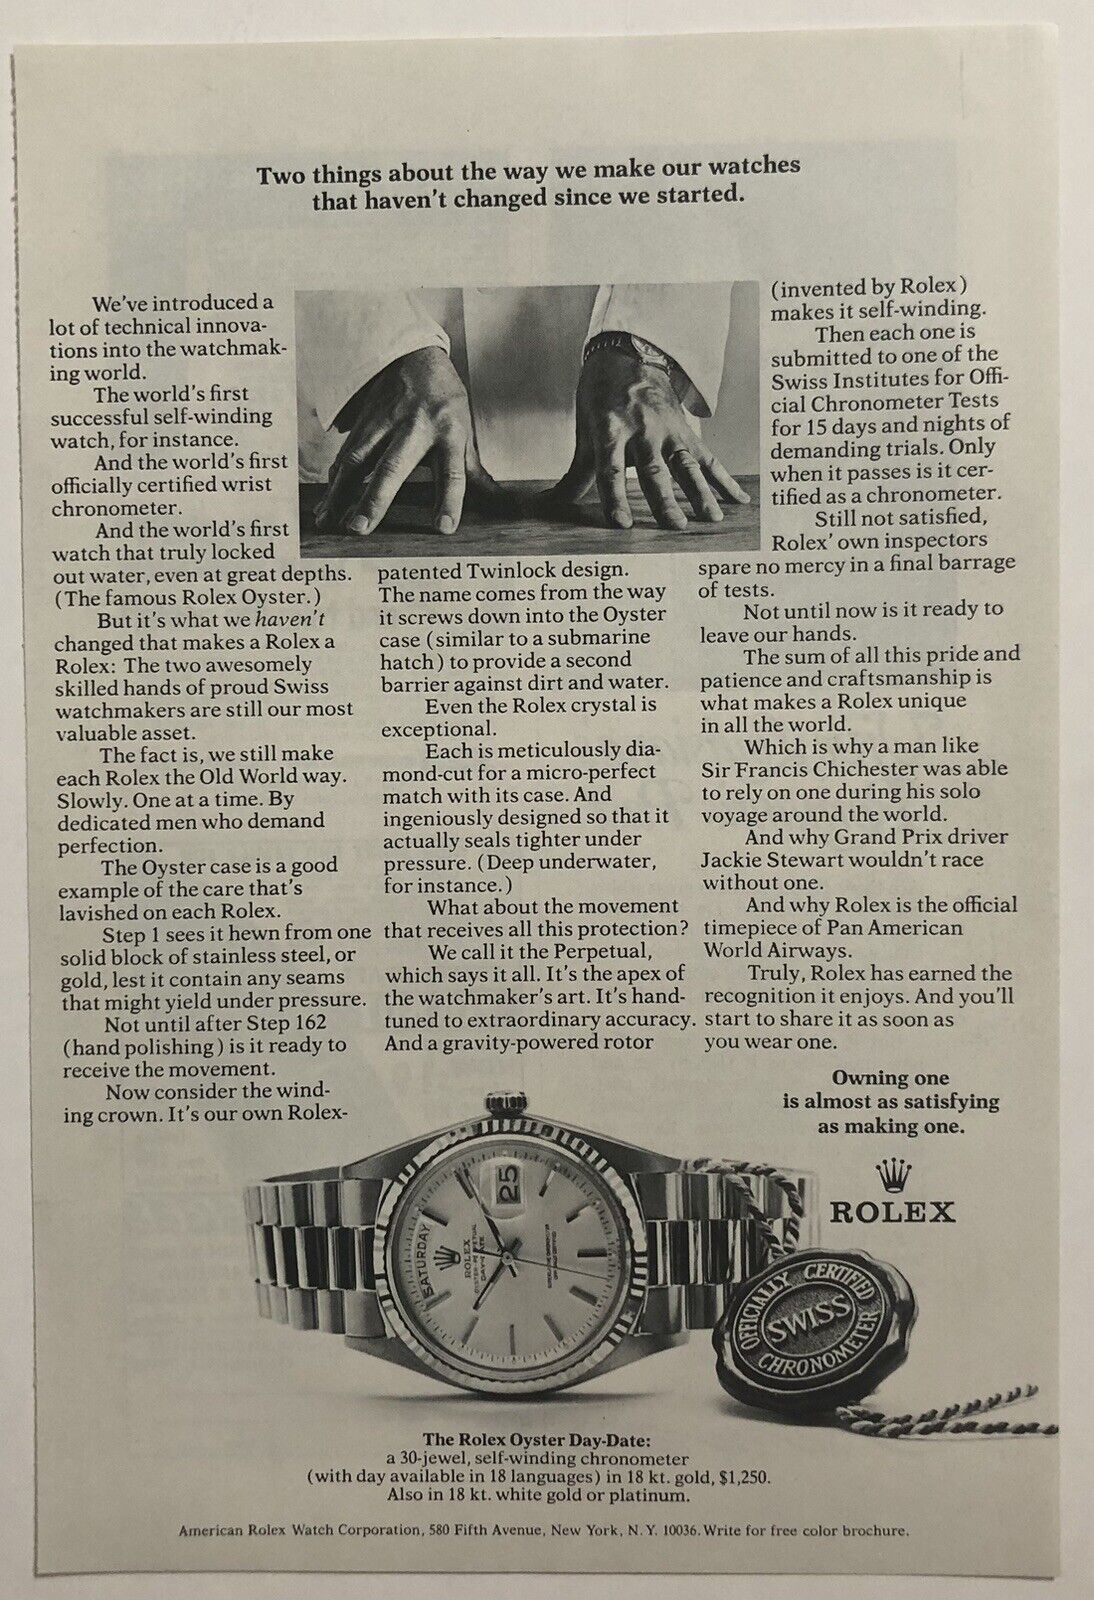 Vintage 1971 Original Print Advertisement Full Page - Rolex Two Things